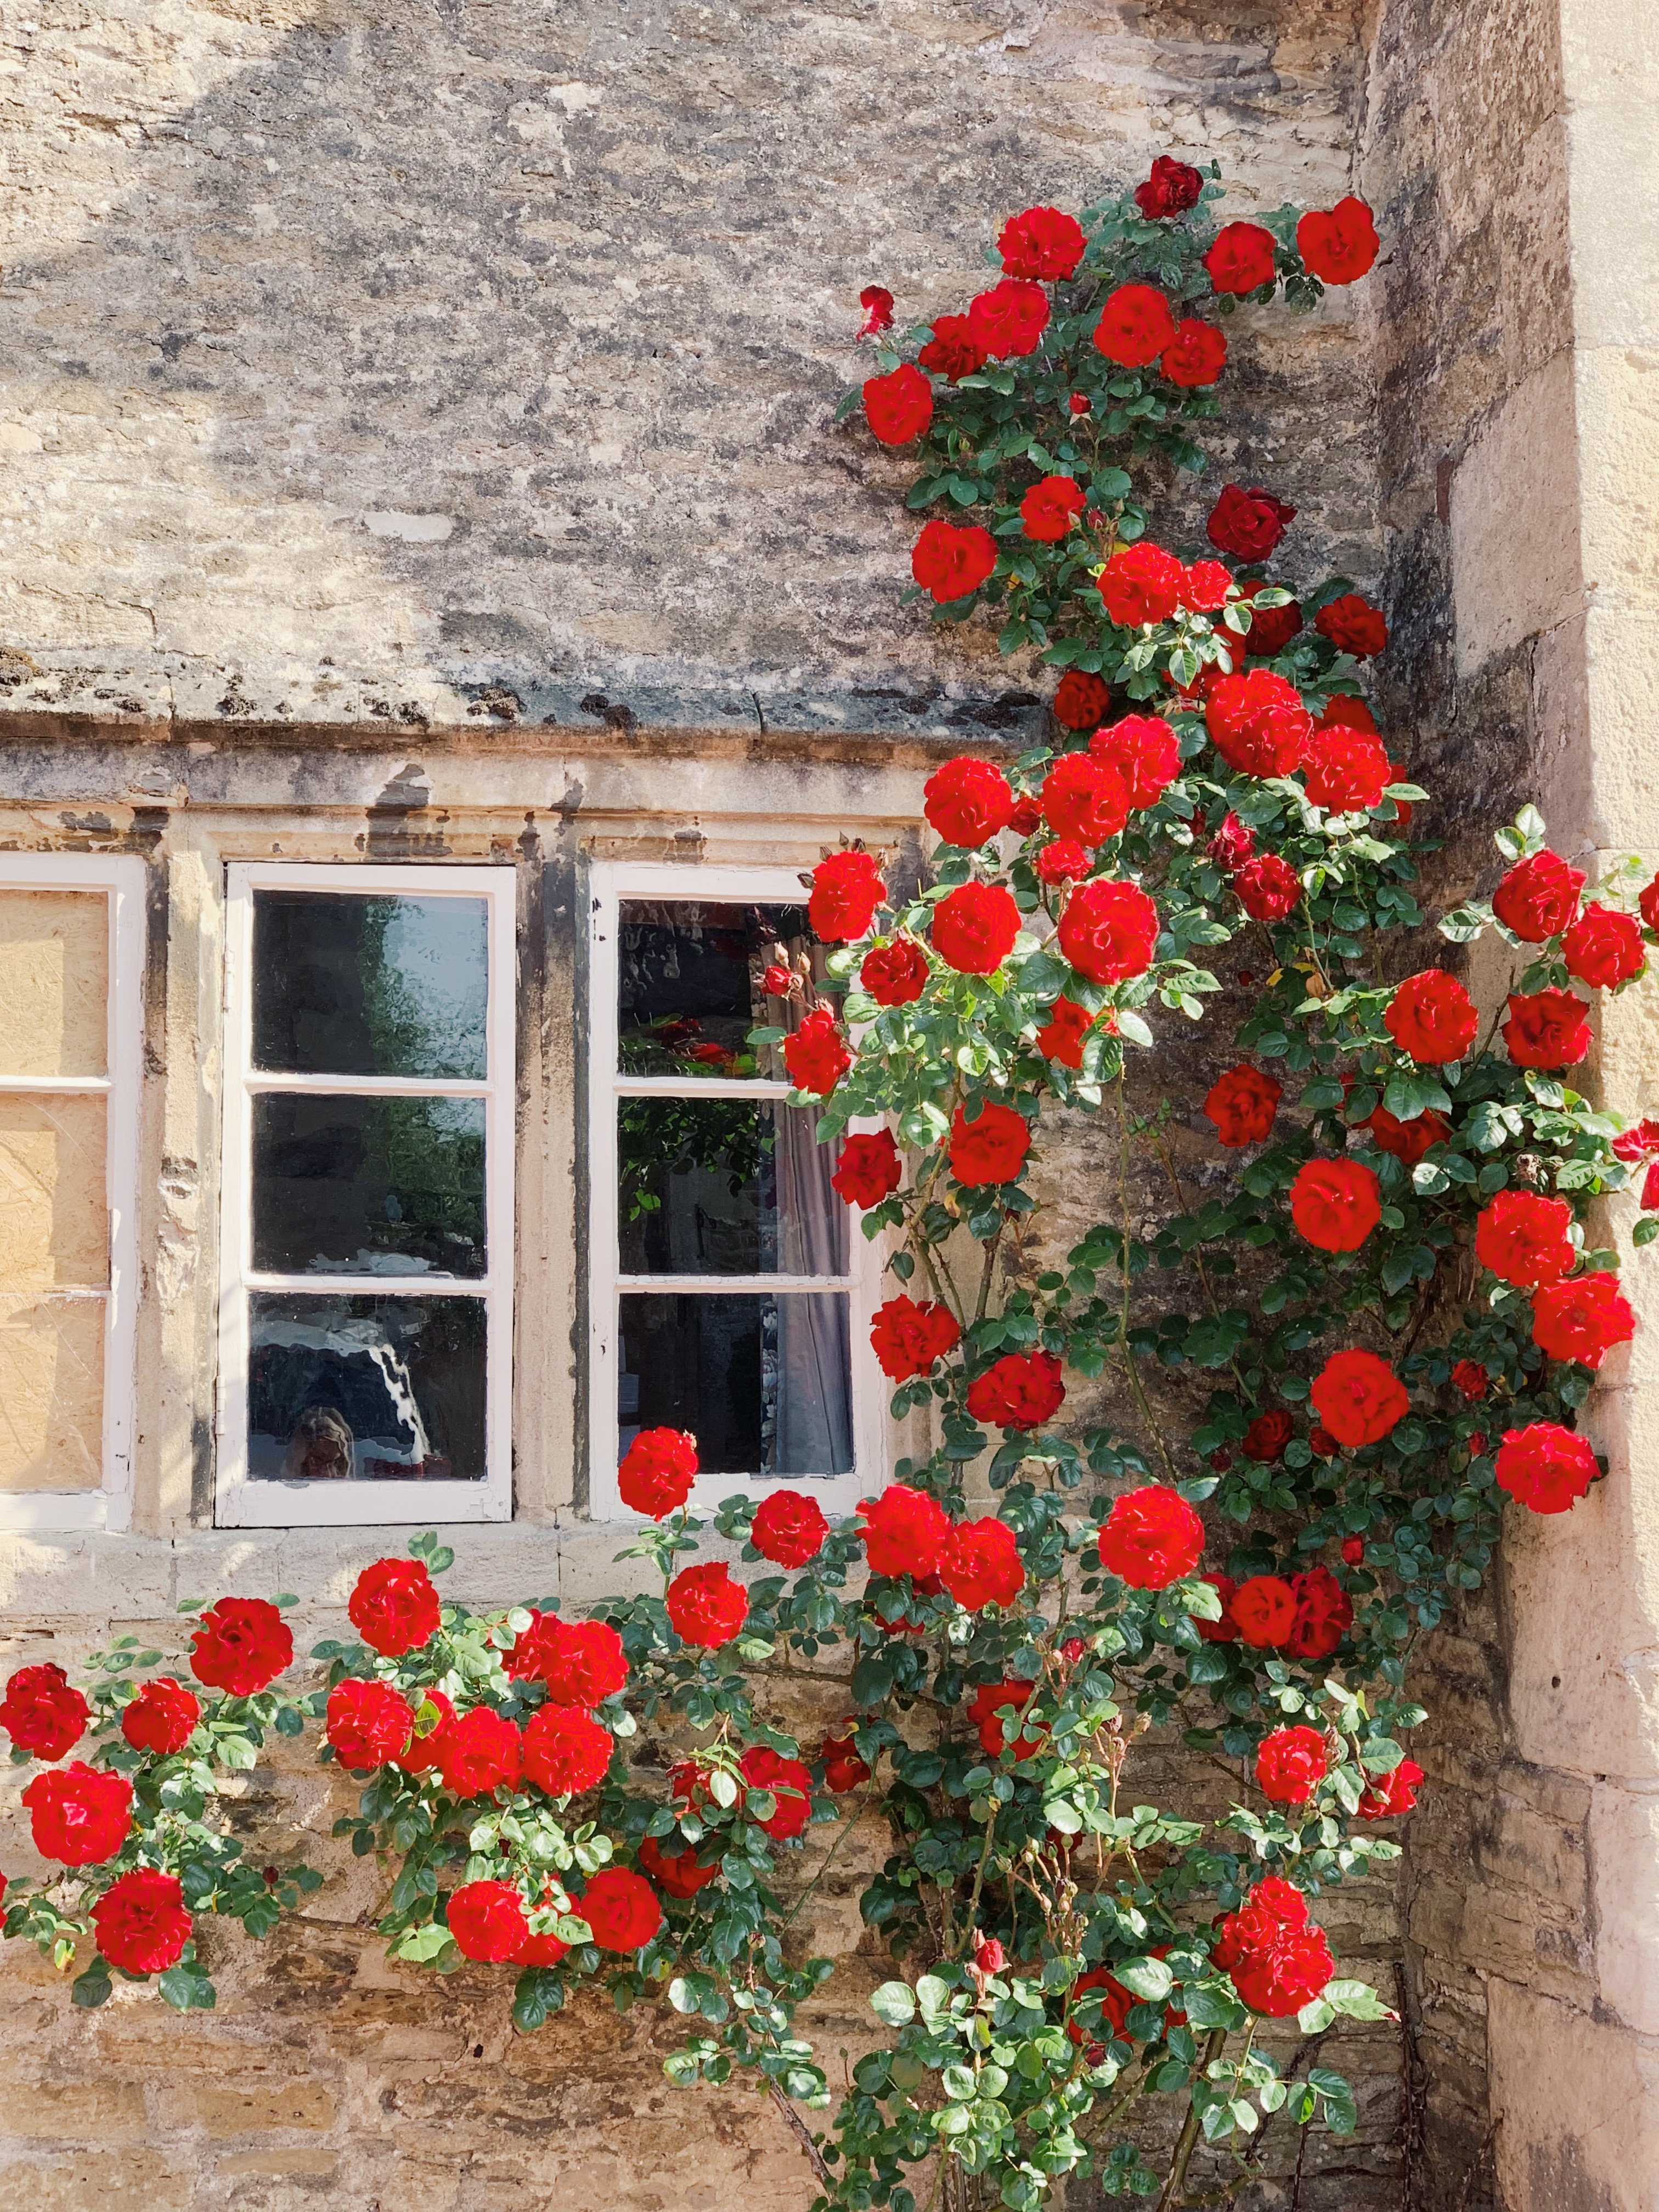 Roses climbing a house in Lackock, England